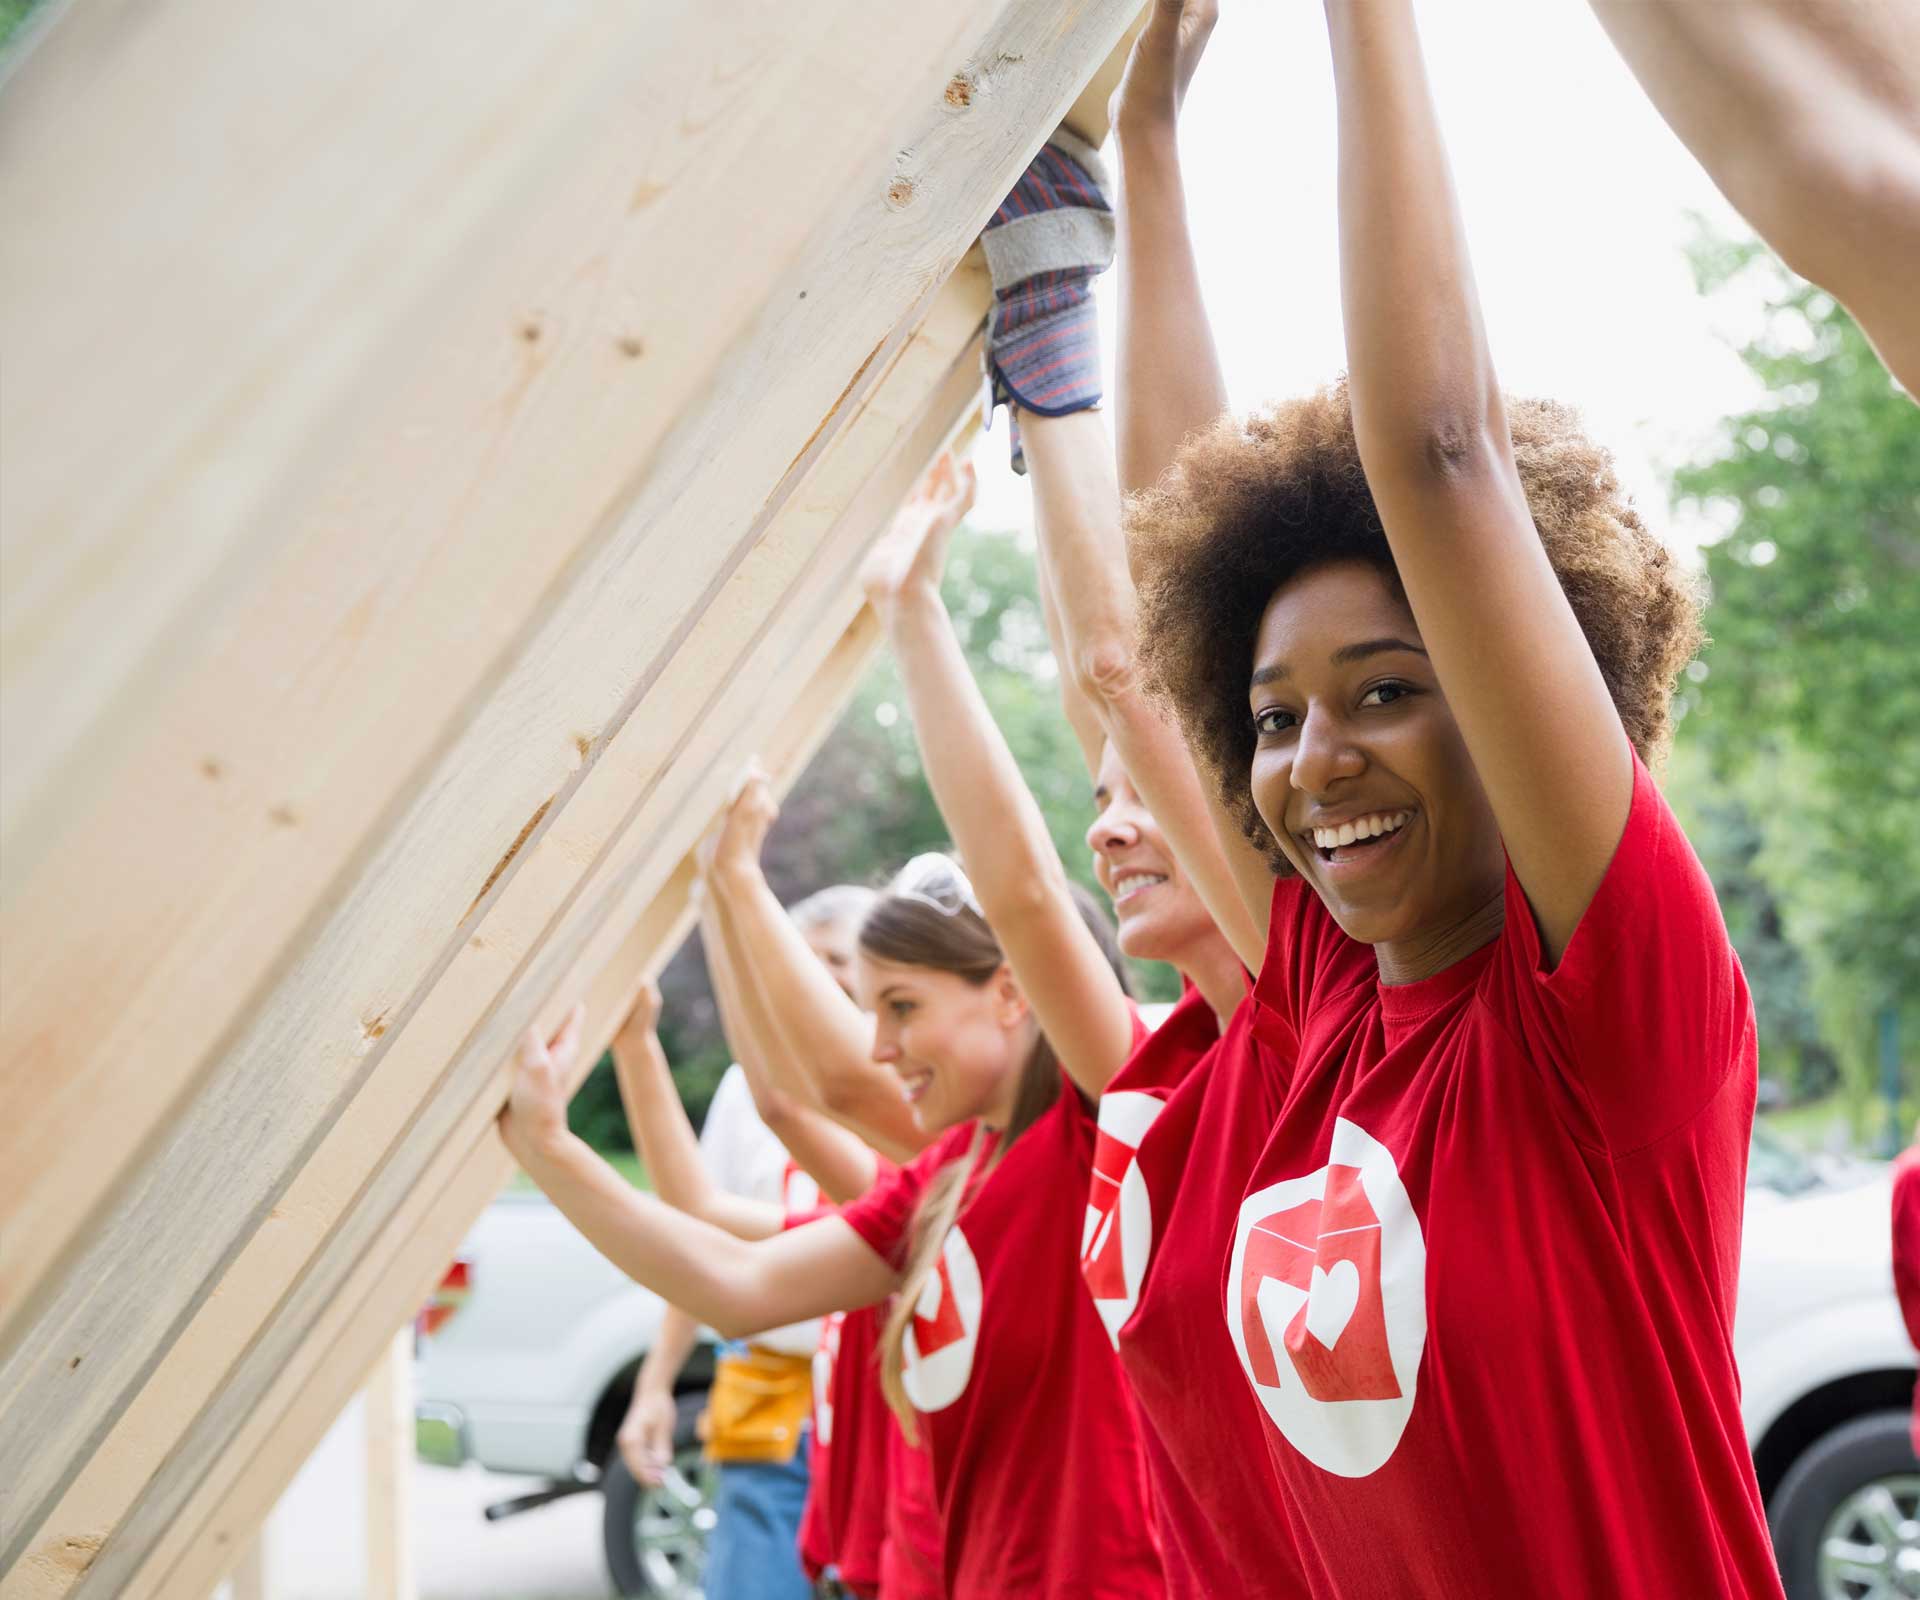 Three ways volunteering can improve your wellbeing